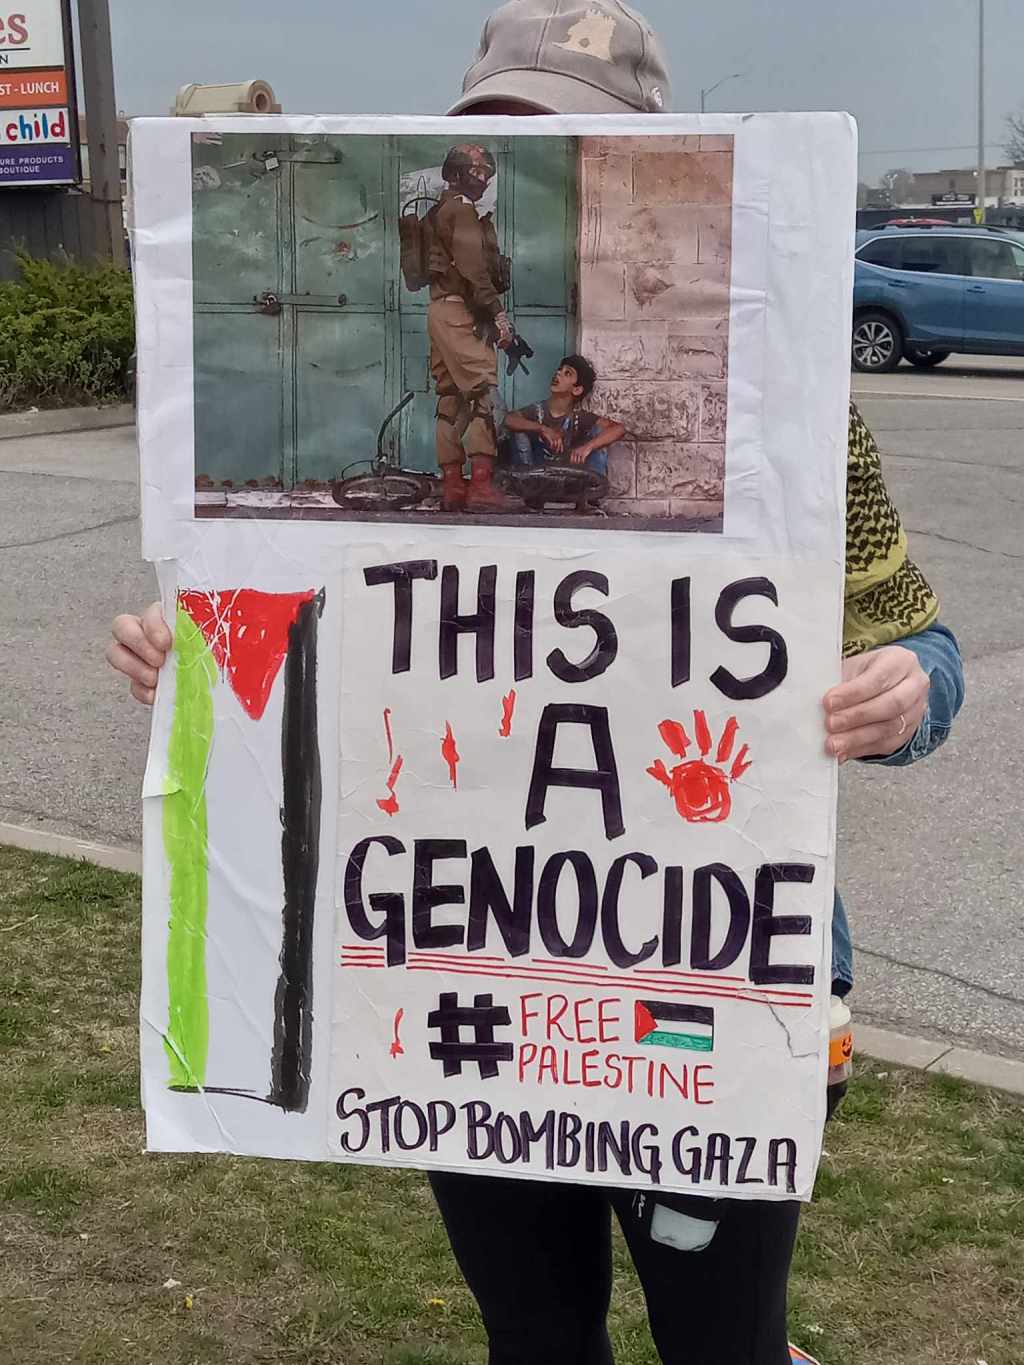 I went to the Belleville Ontario anti-Genocide protest. #FreePalestine